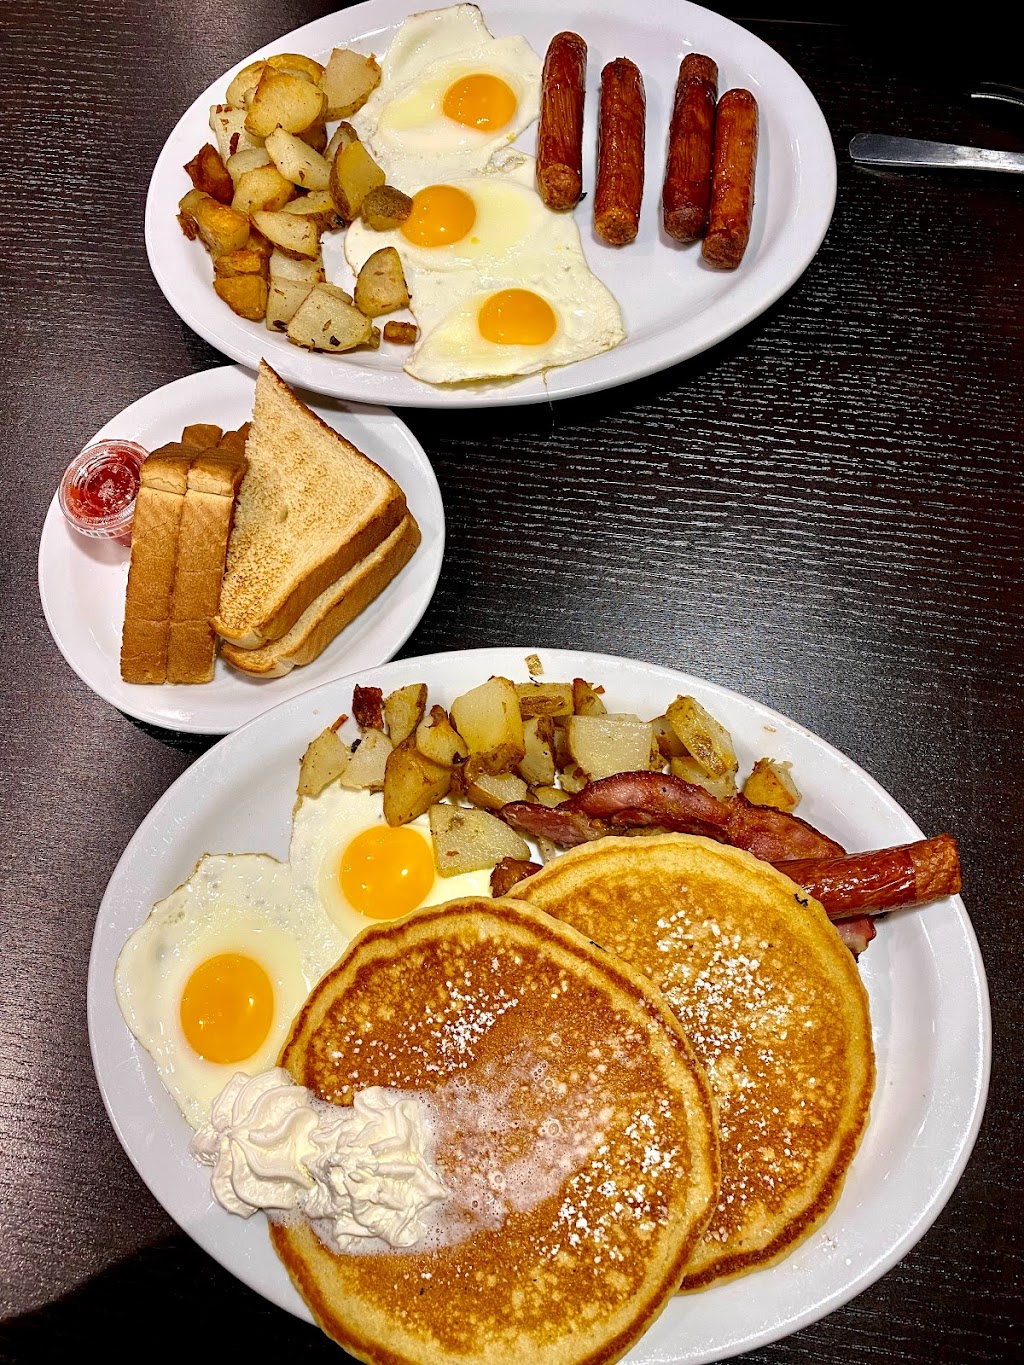 Stacked Pancake & Breakfast House St. Catharines | 286 Bunting Rd, St. Catharines, ON L2M 7S5, Canada | Phone: (289) 479-0280